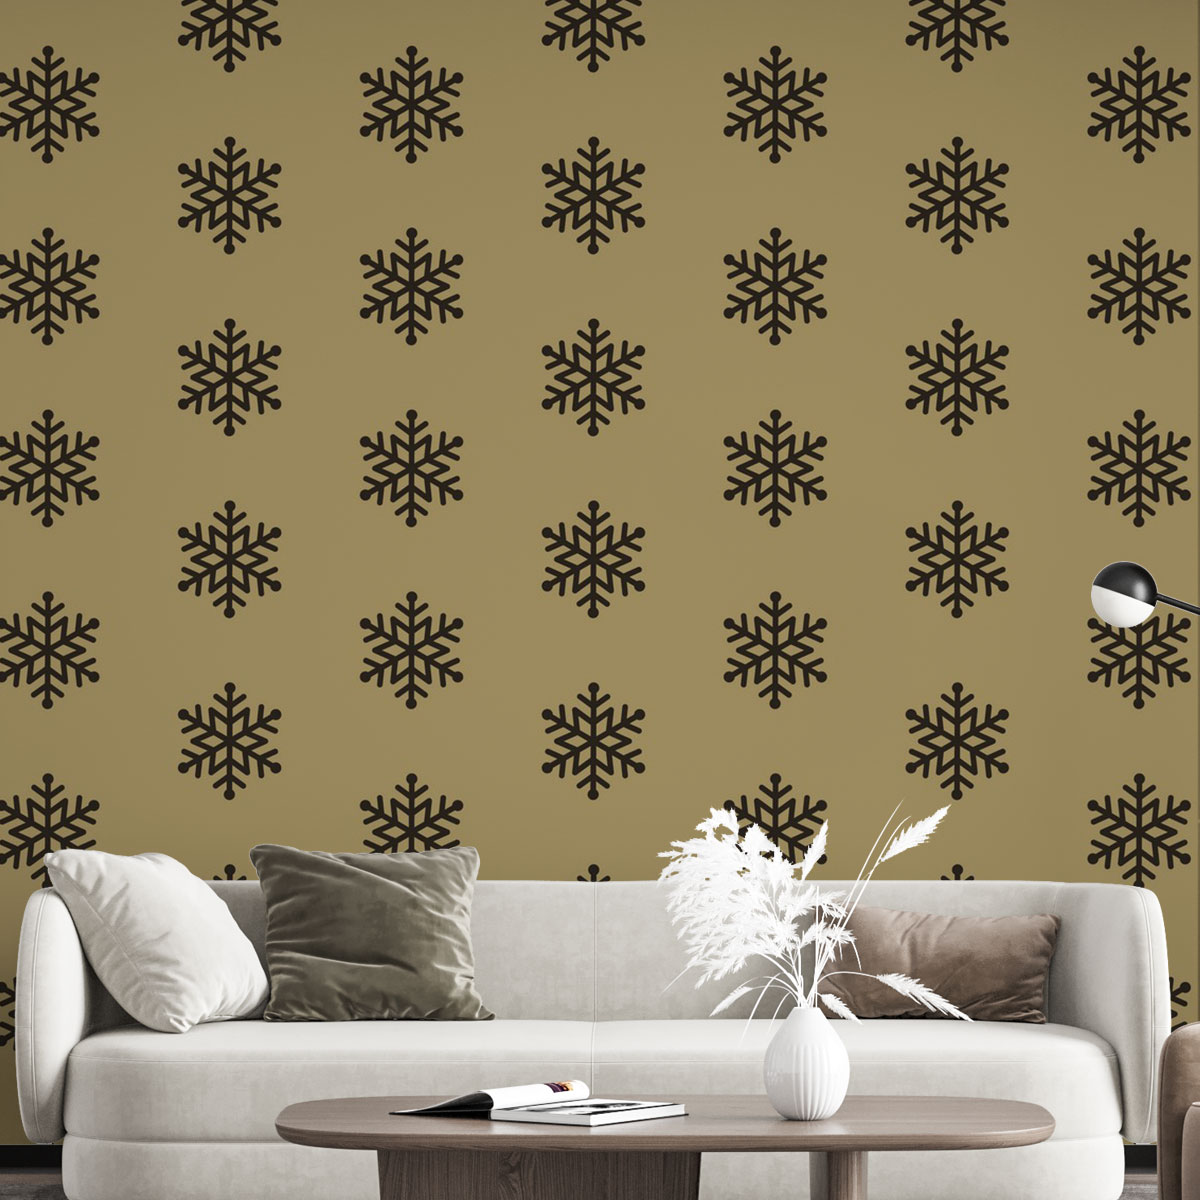 Christmas Snowflake Clipart On The Brown Background Wall Mural